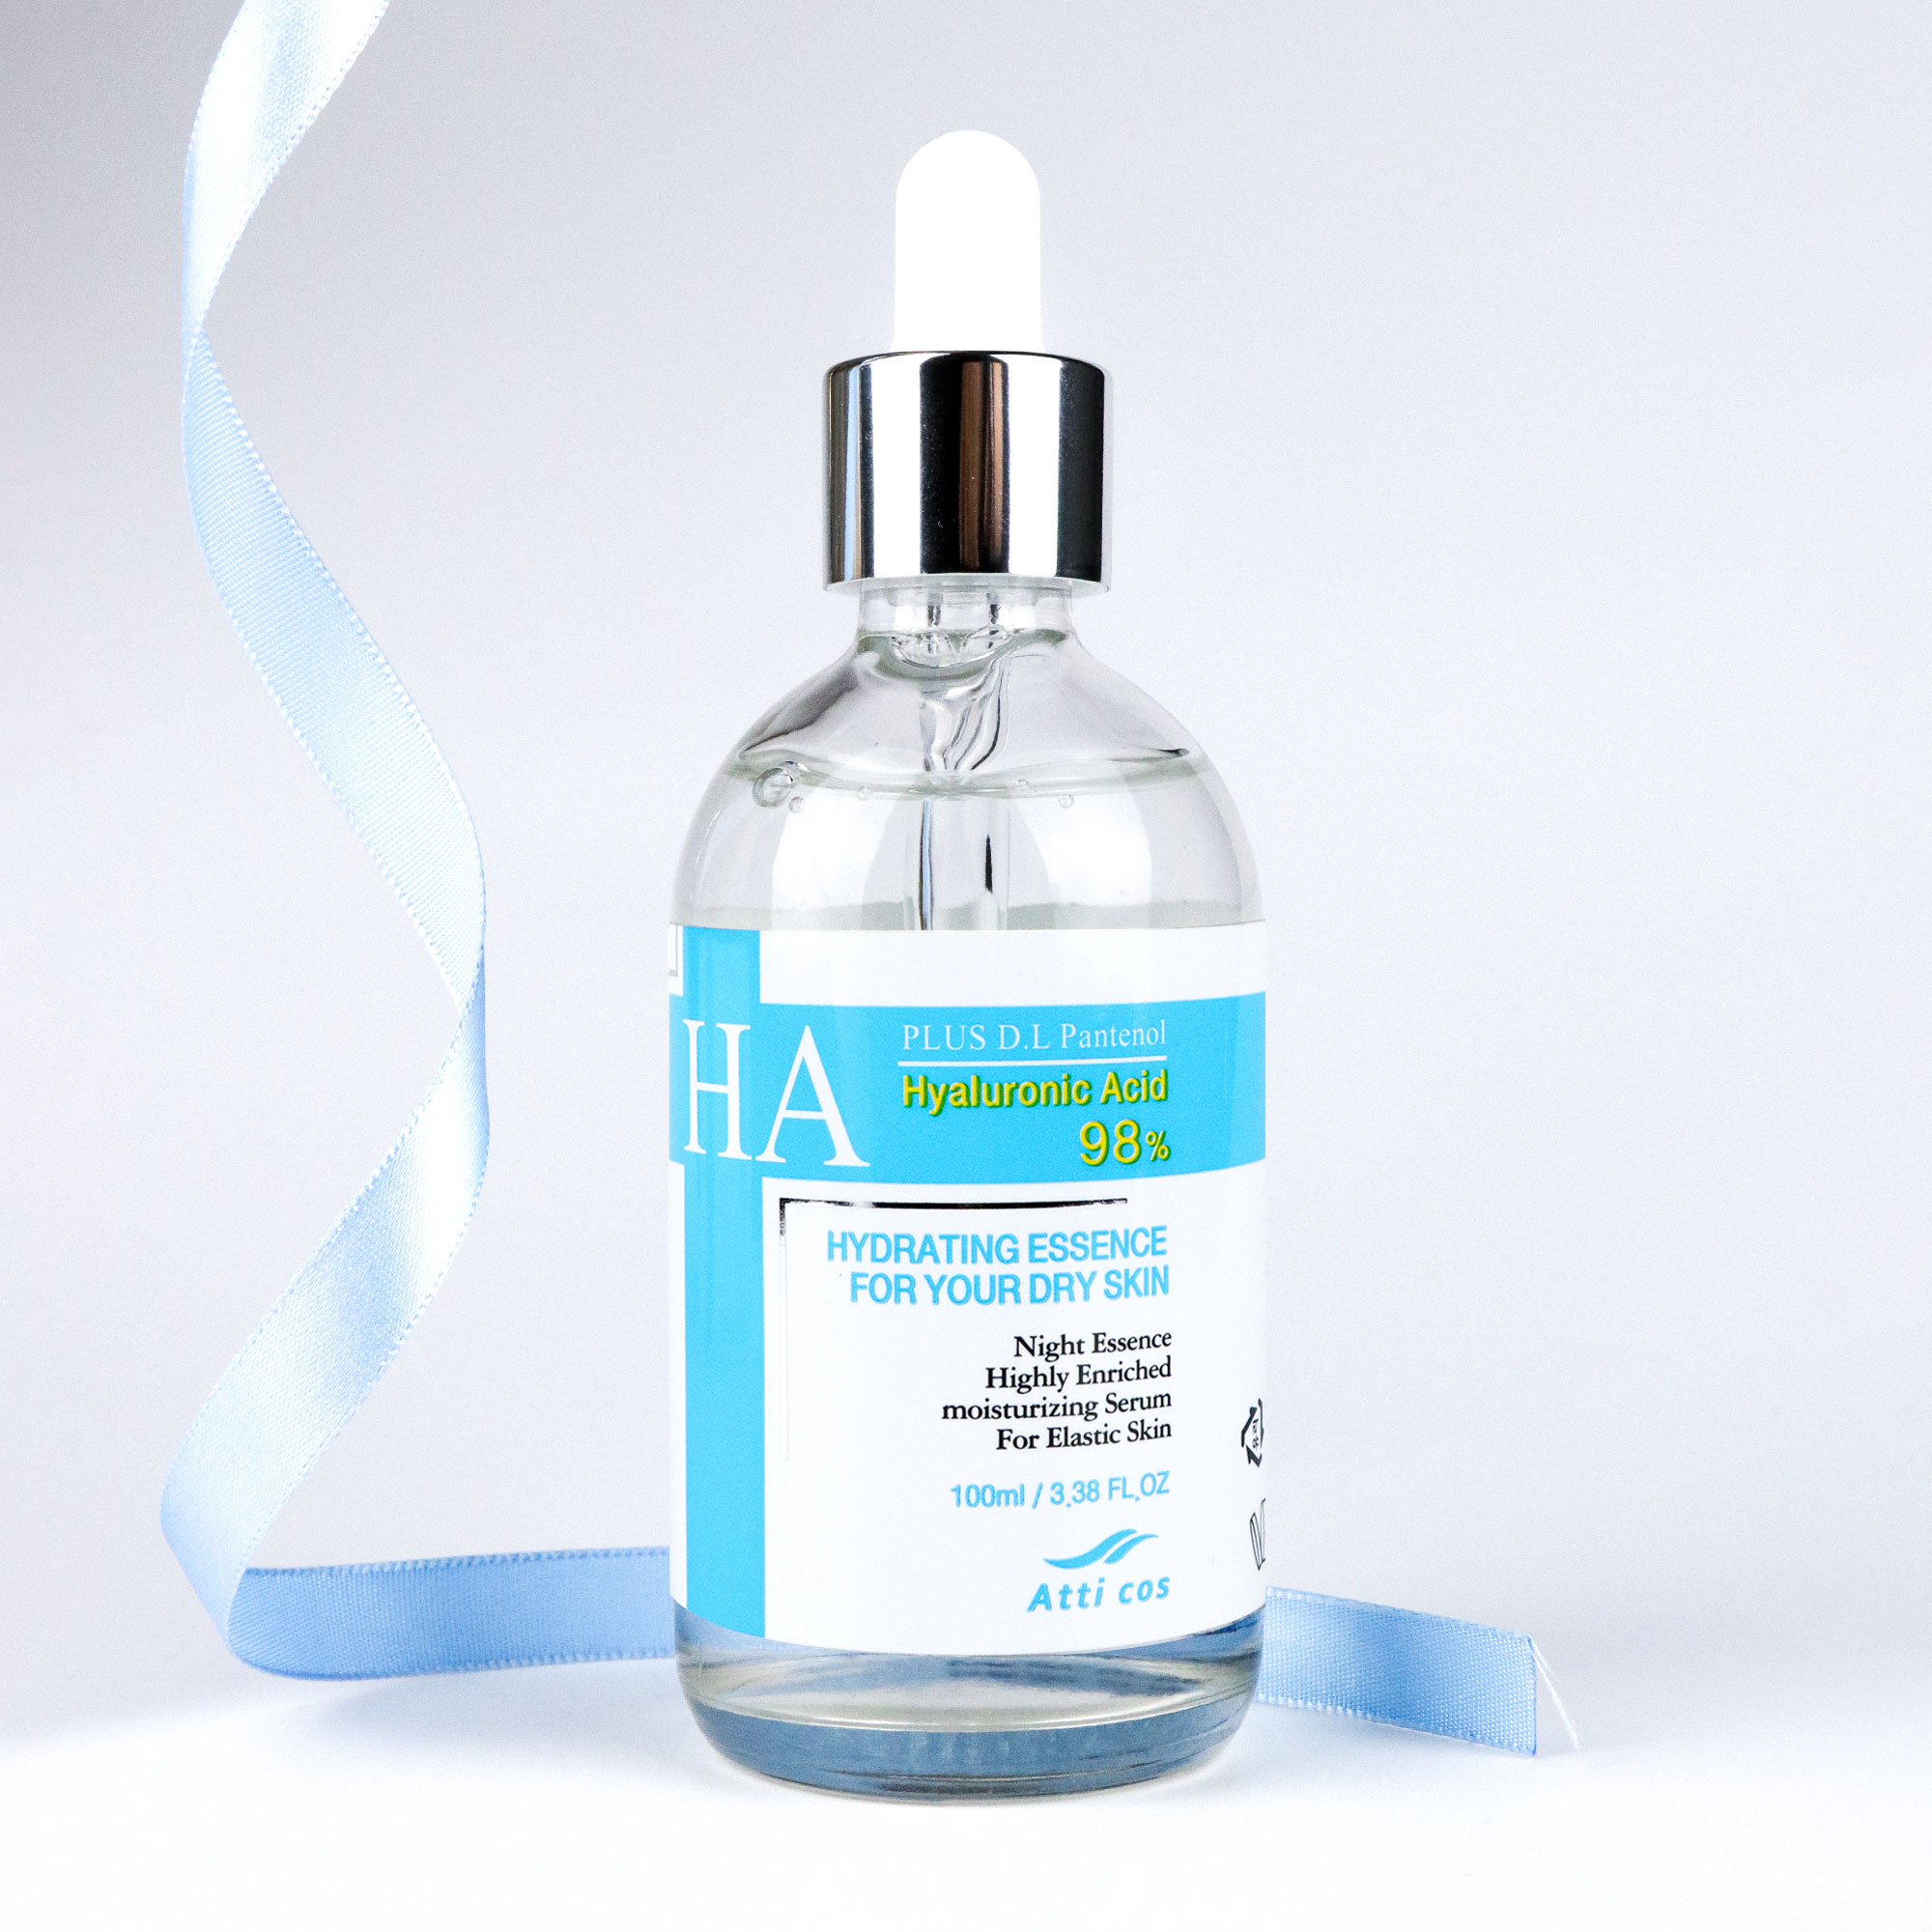 Atticos Hyaluronic Acid Ampoule 100 ml / NMF Natural Moisturizing Factor